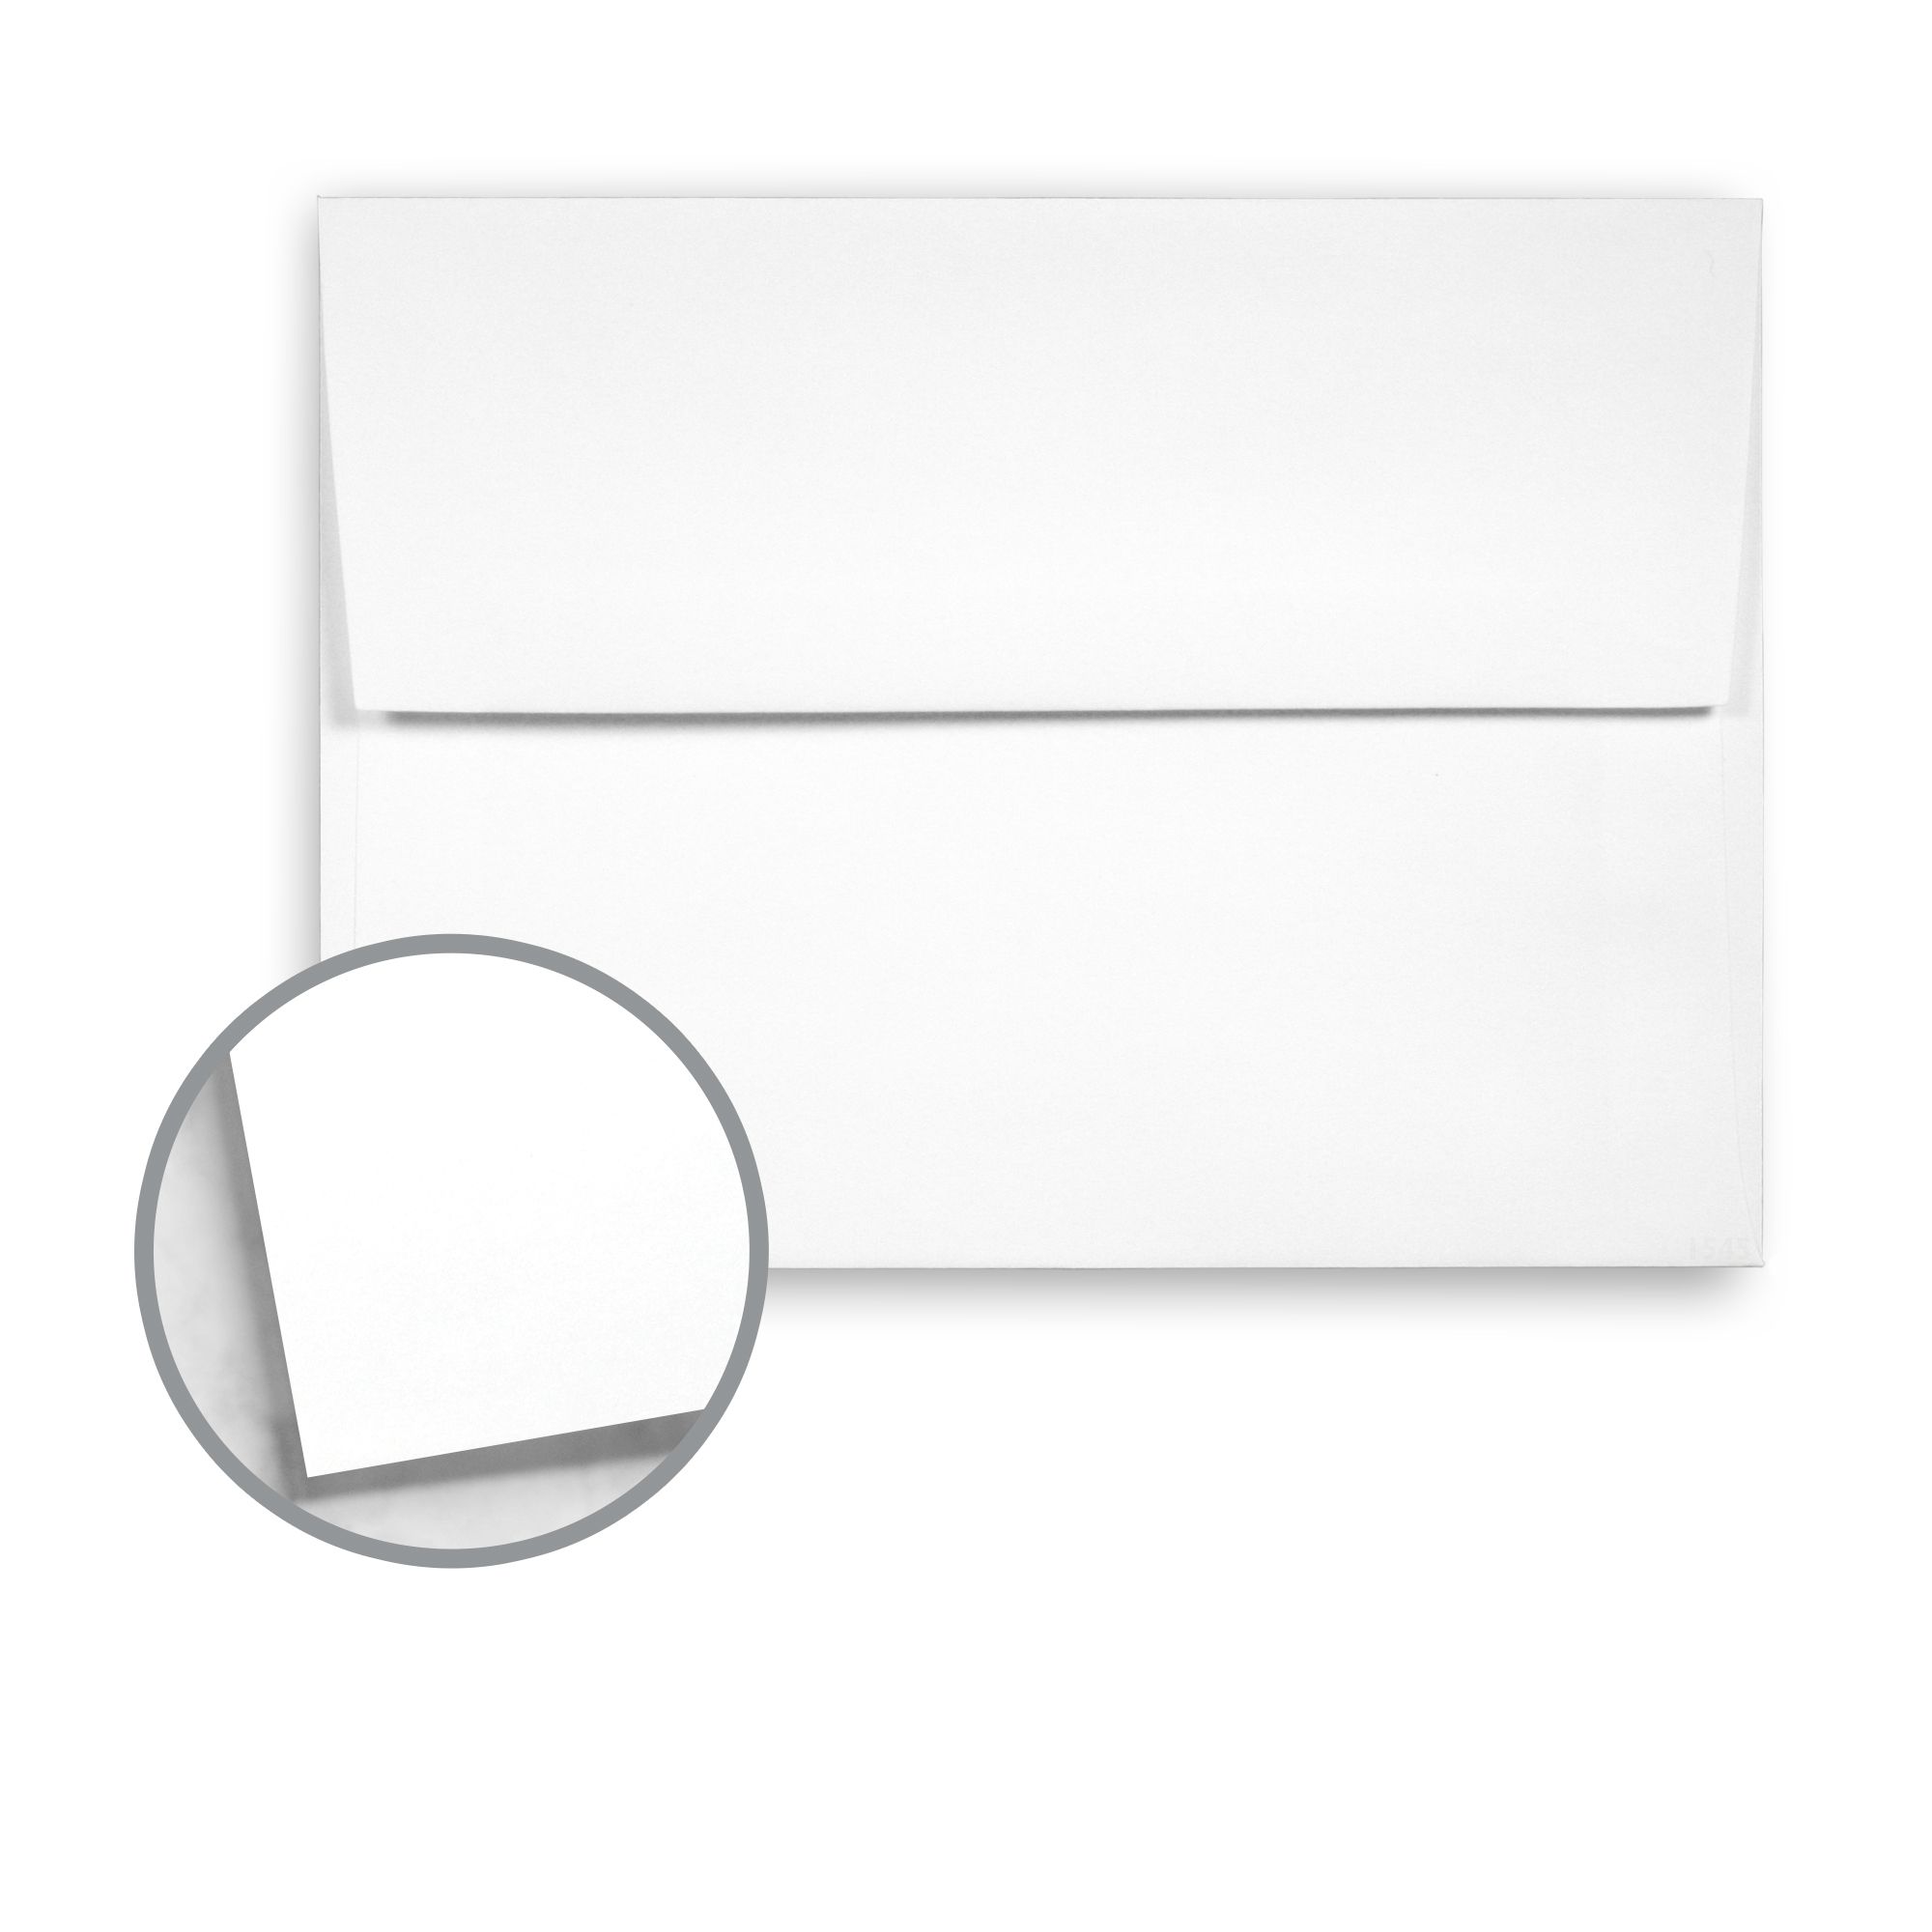 White Envelopes - A7 (5 1/4 x 7 1/4) 70 lb Text Smooth 10% Recycled